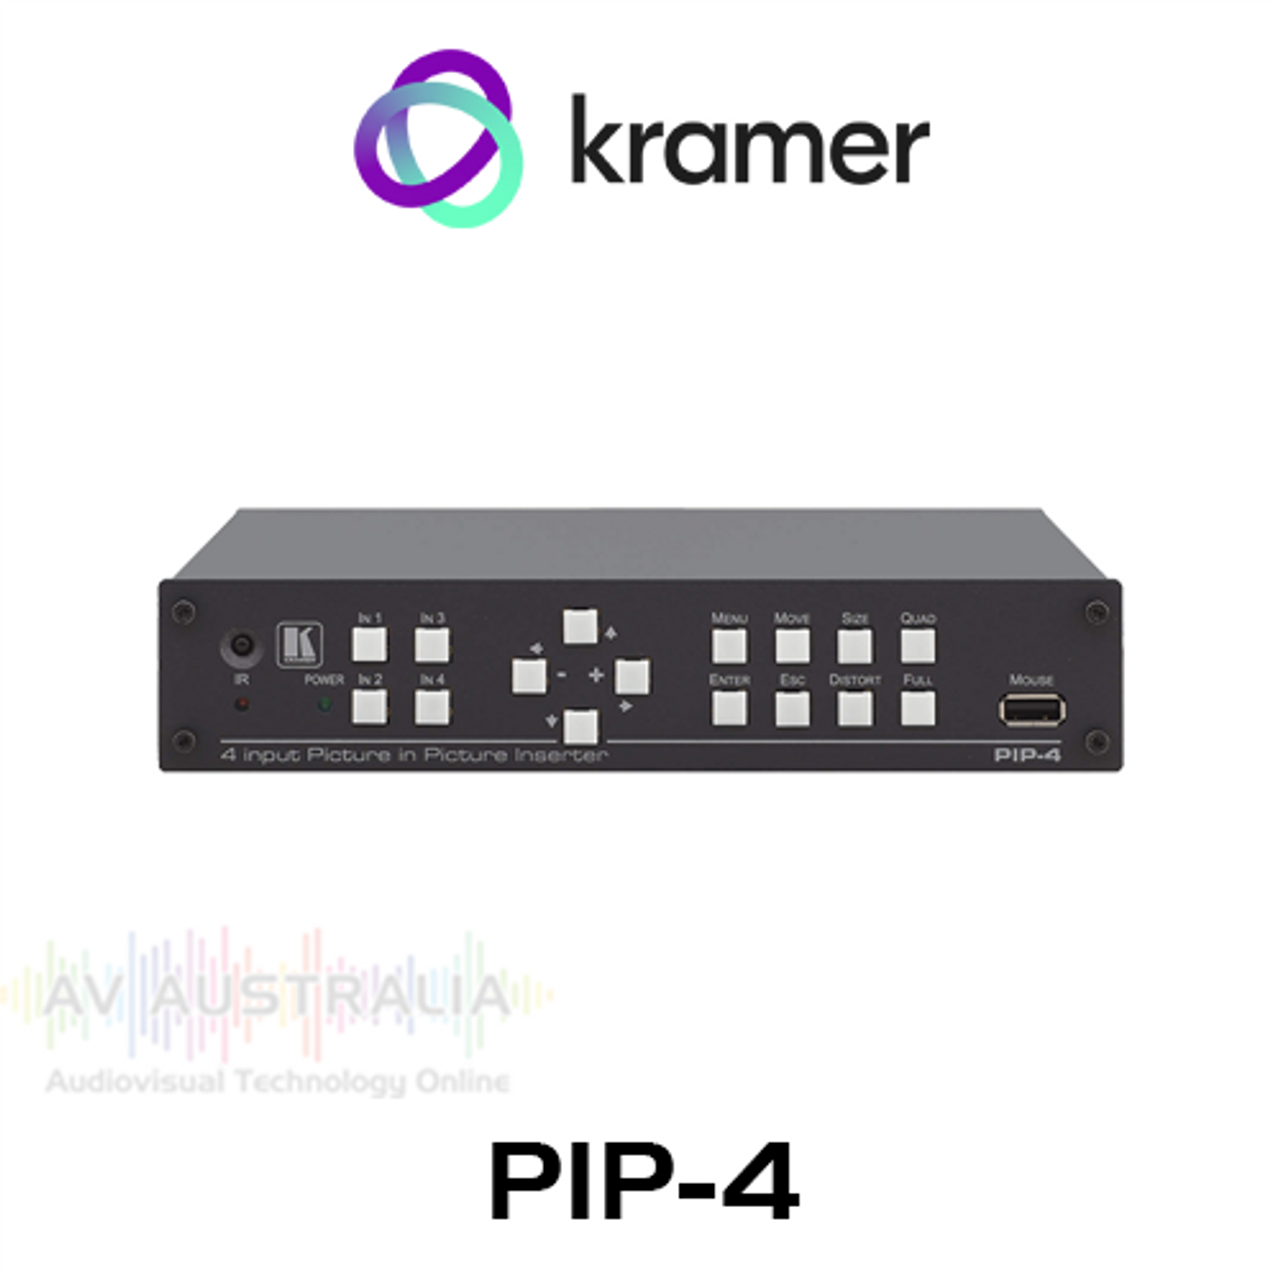 Kramer PIP-4 4 Composite Video Picture-in-Picture Inserter